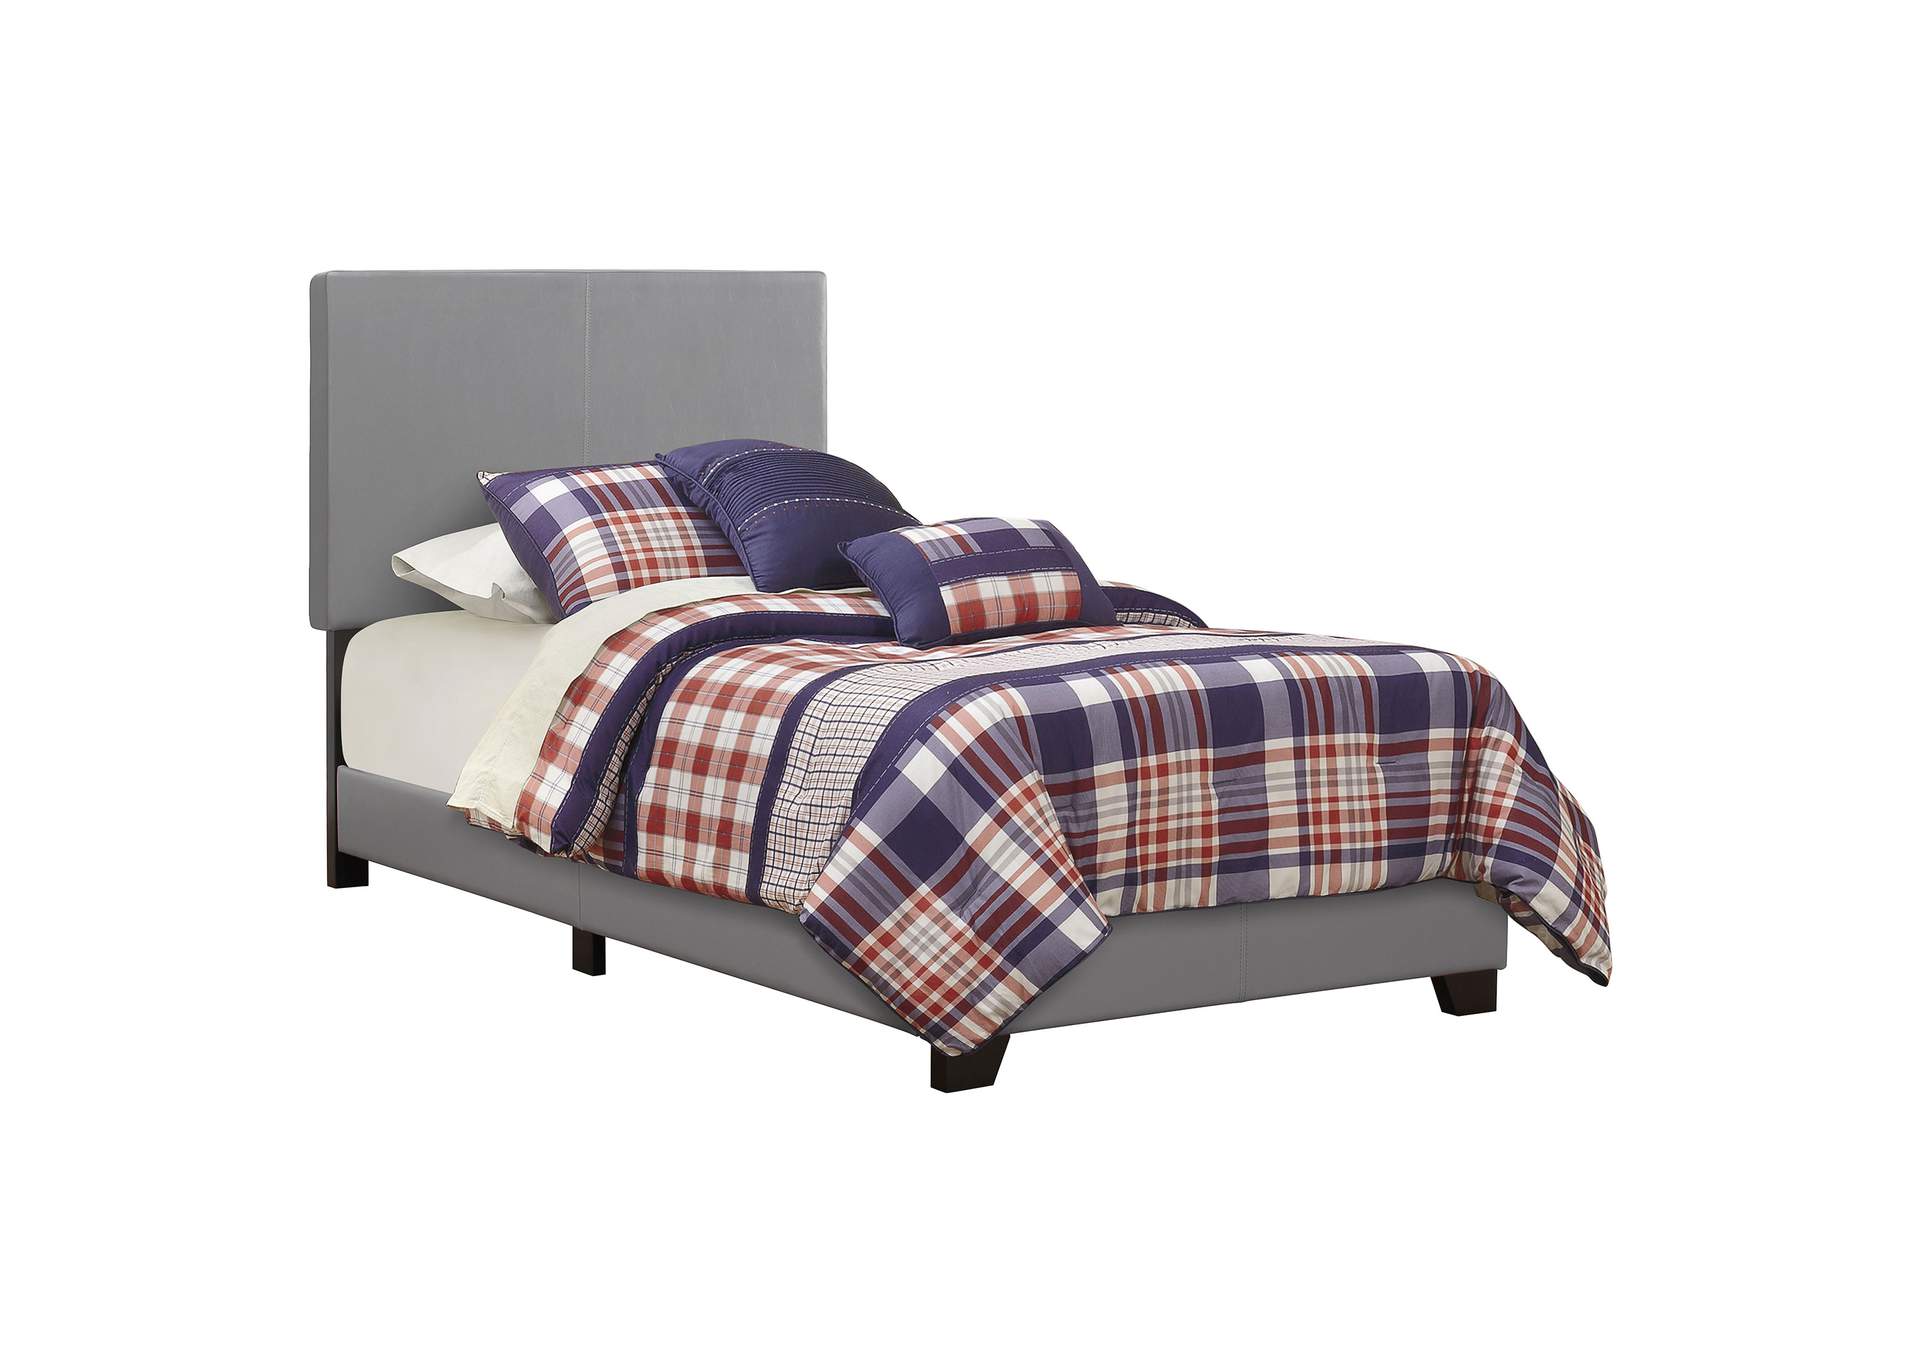 Dorian Upholstered Twin Bed Grey,Coaster Furniture